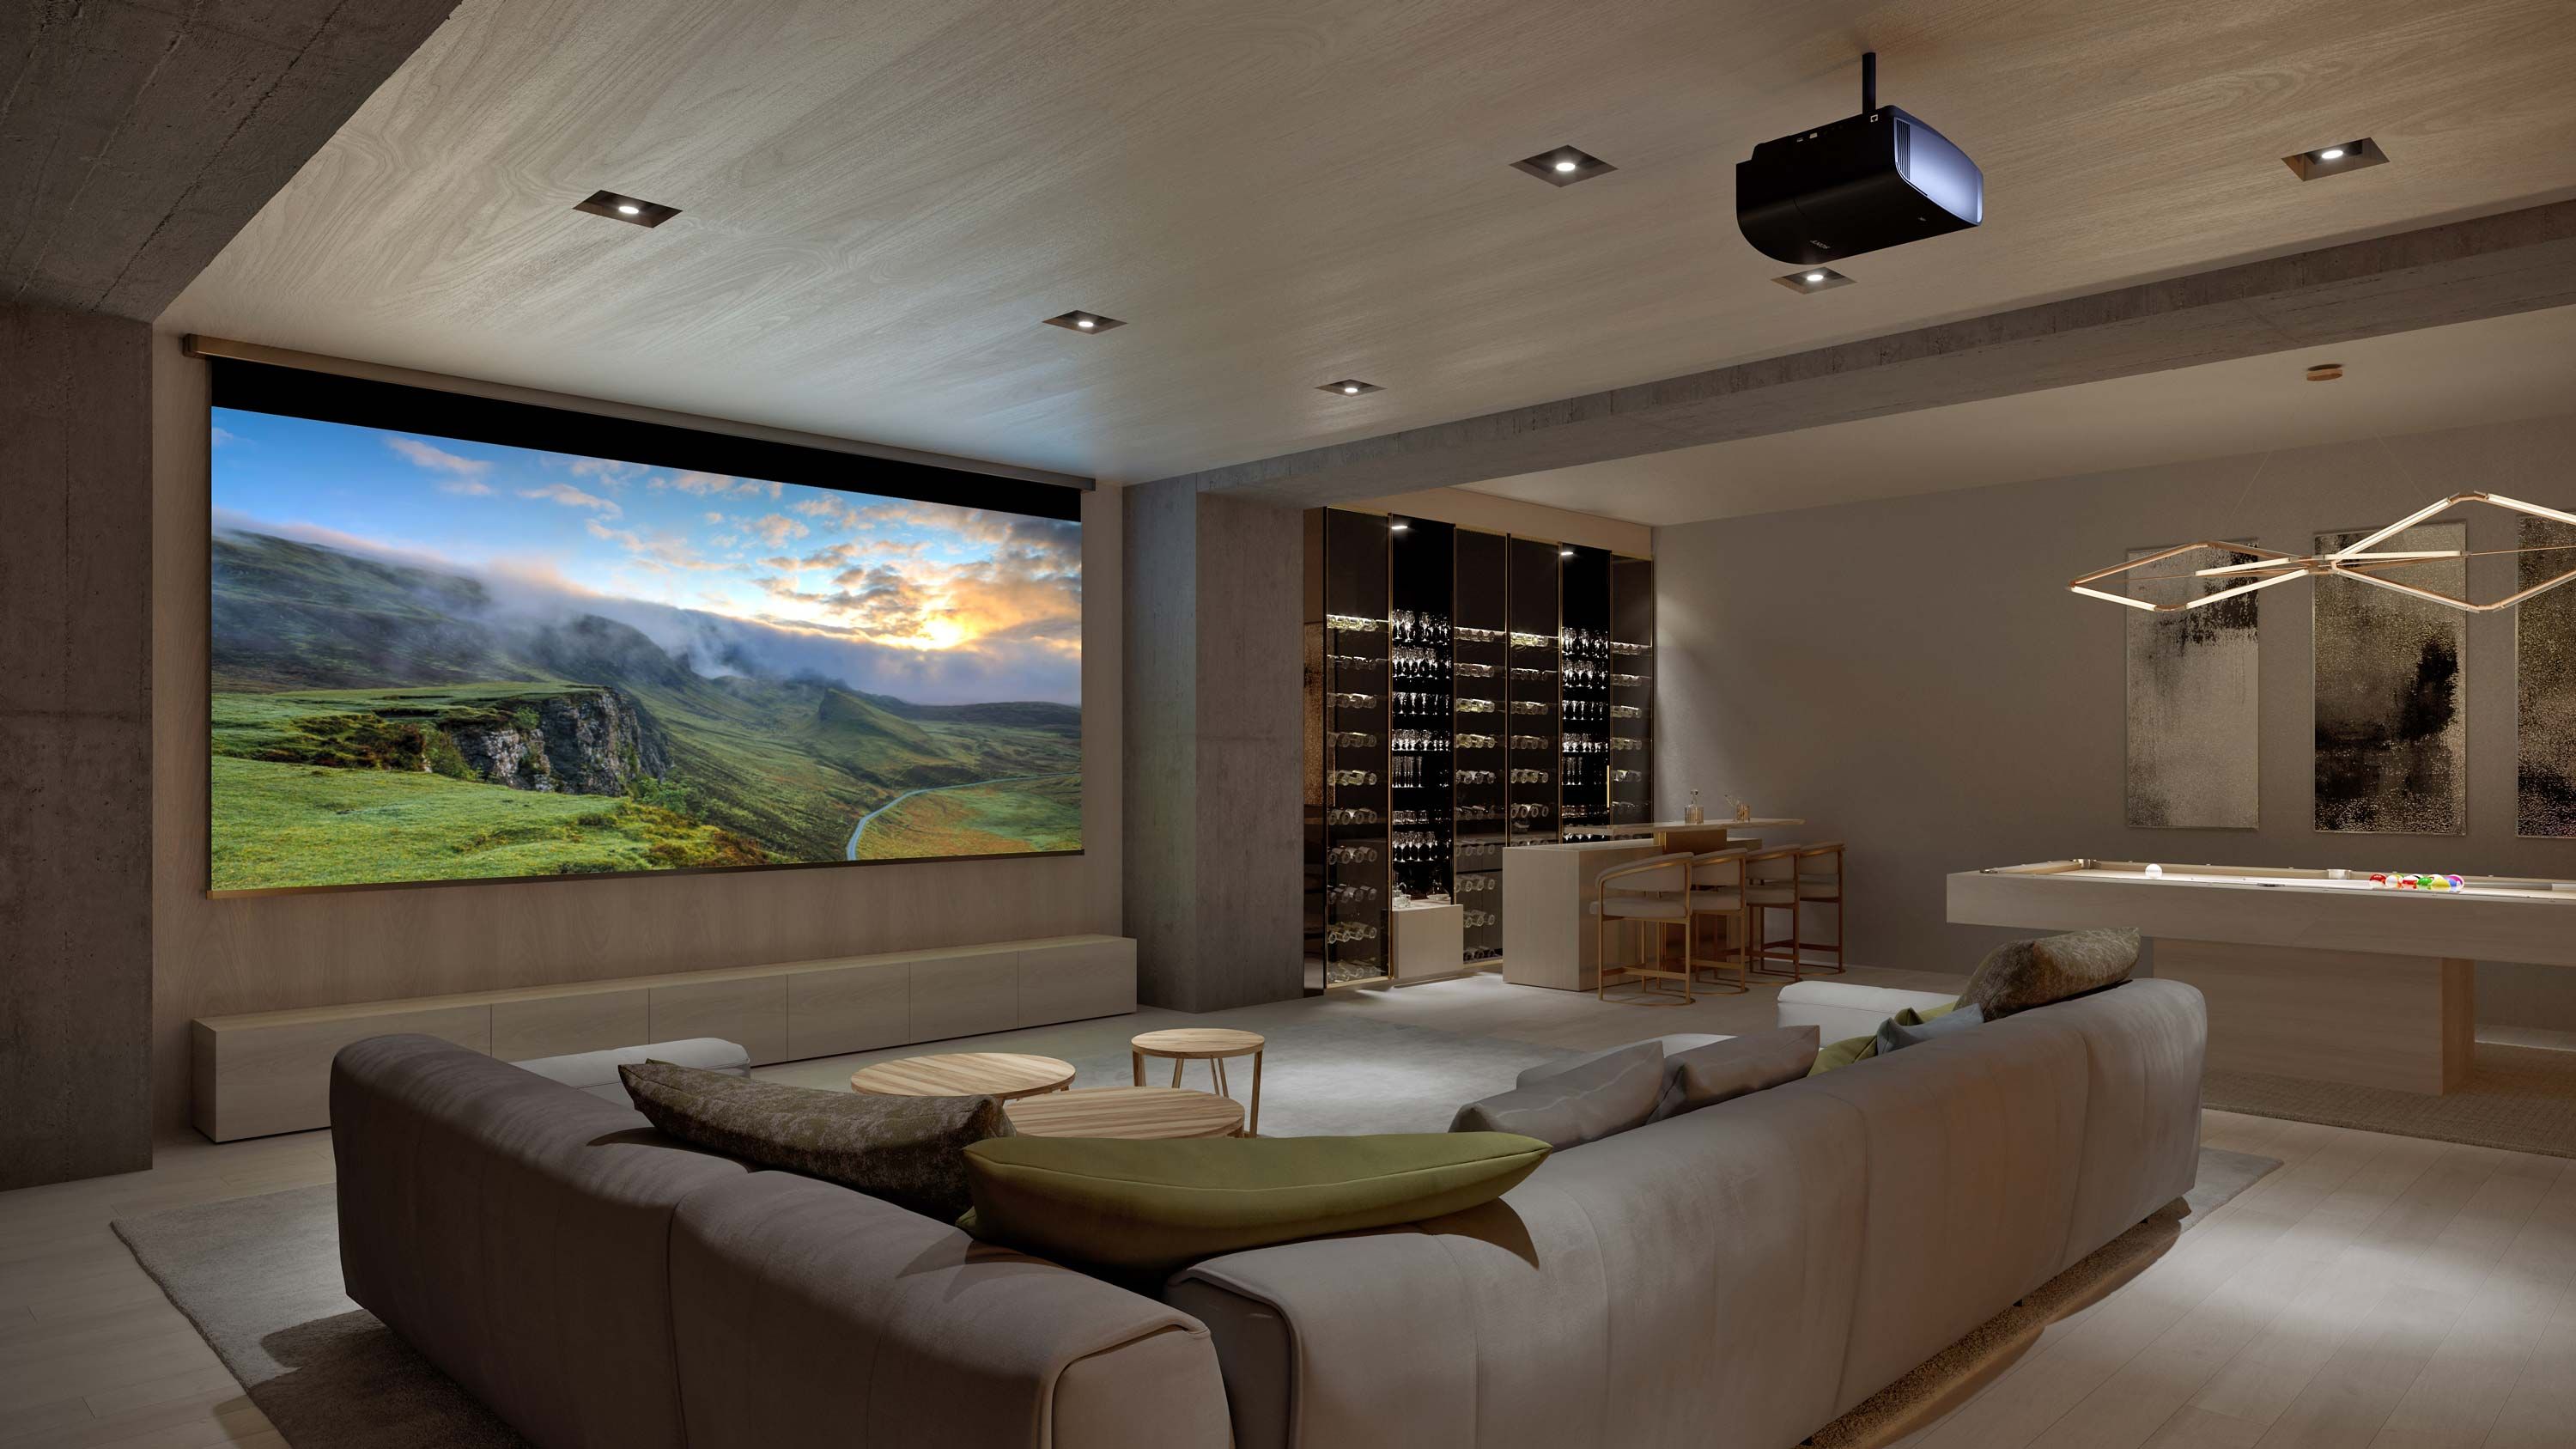 Sony media room with large projector screen and modern home bar